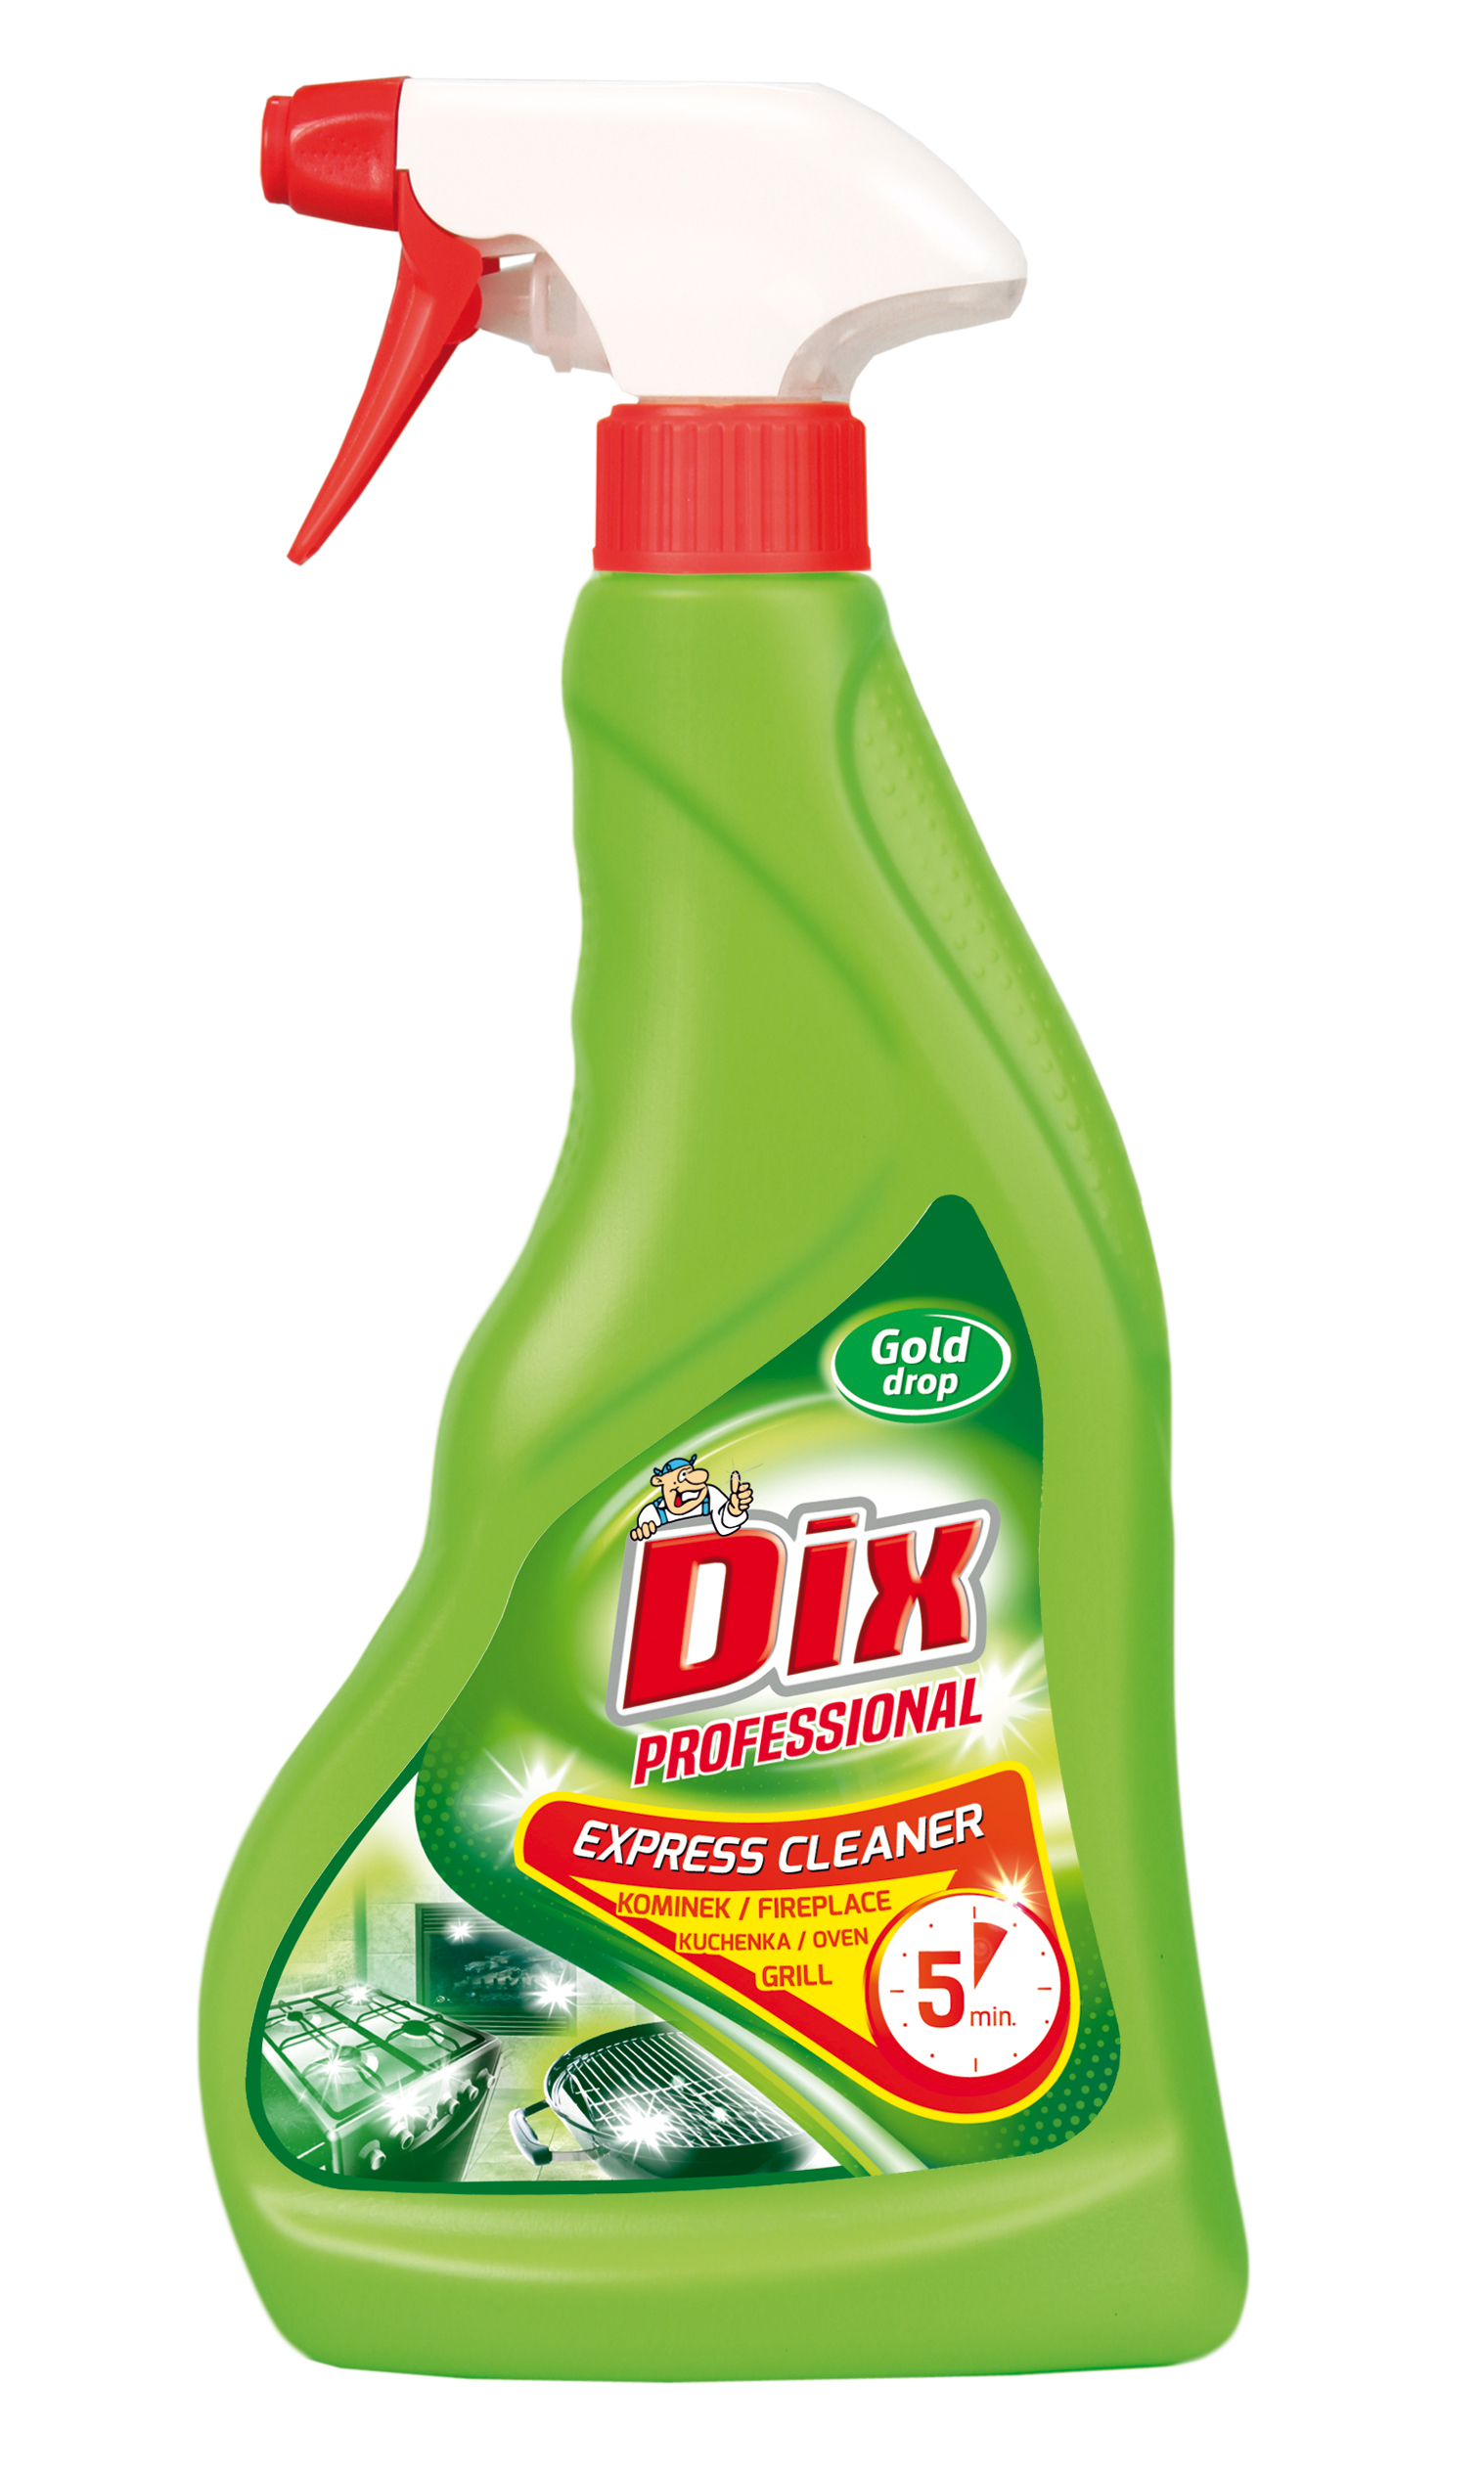 DIX PROFESSIONAL Express Cleaner